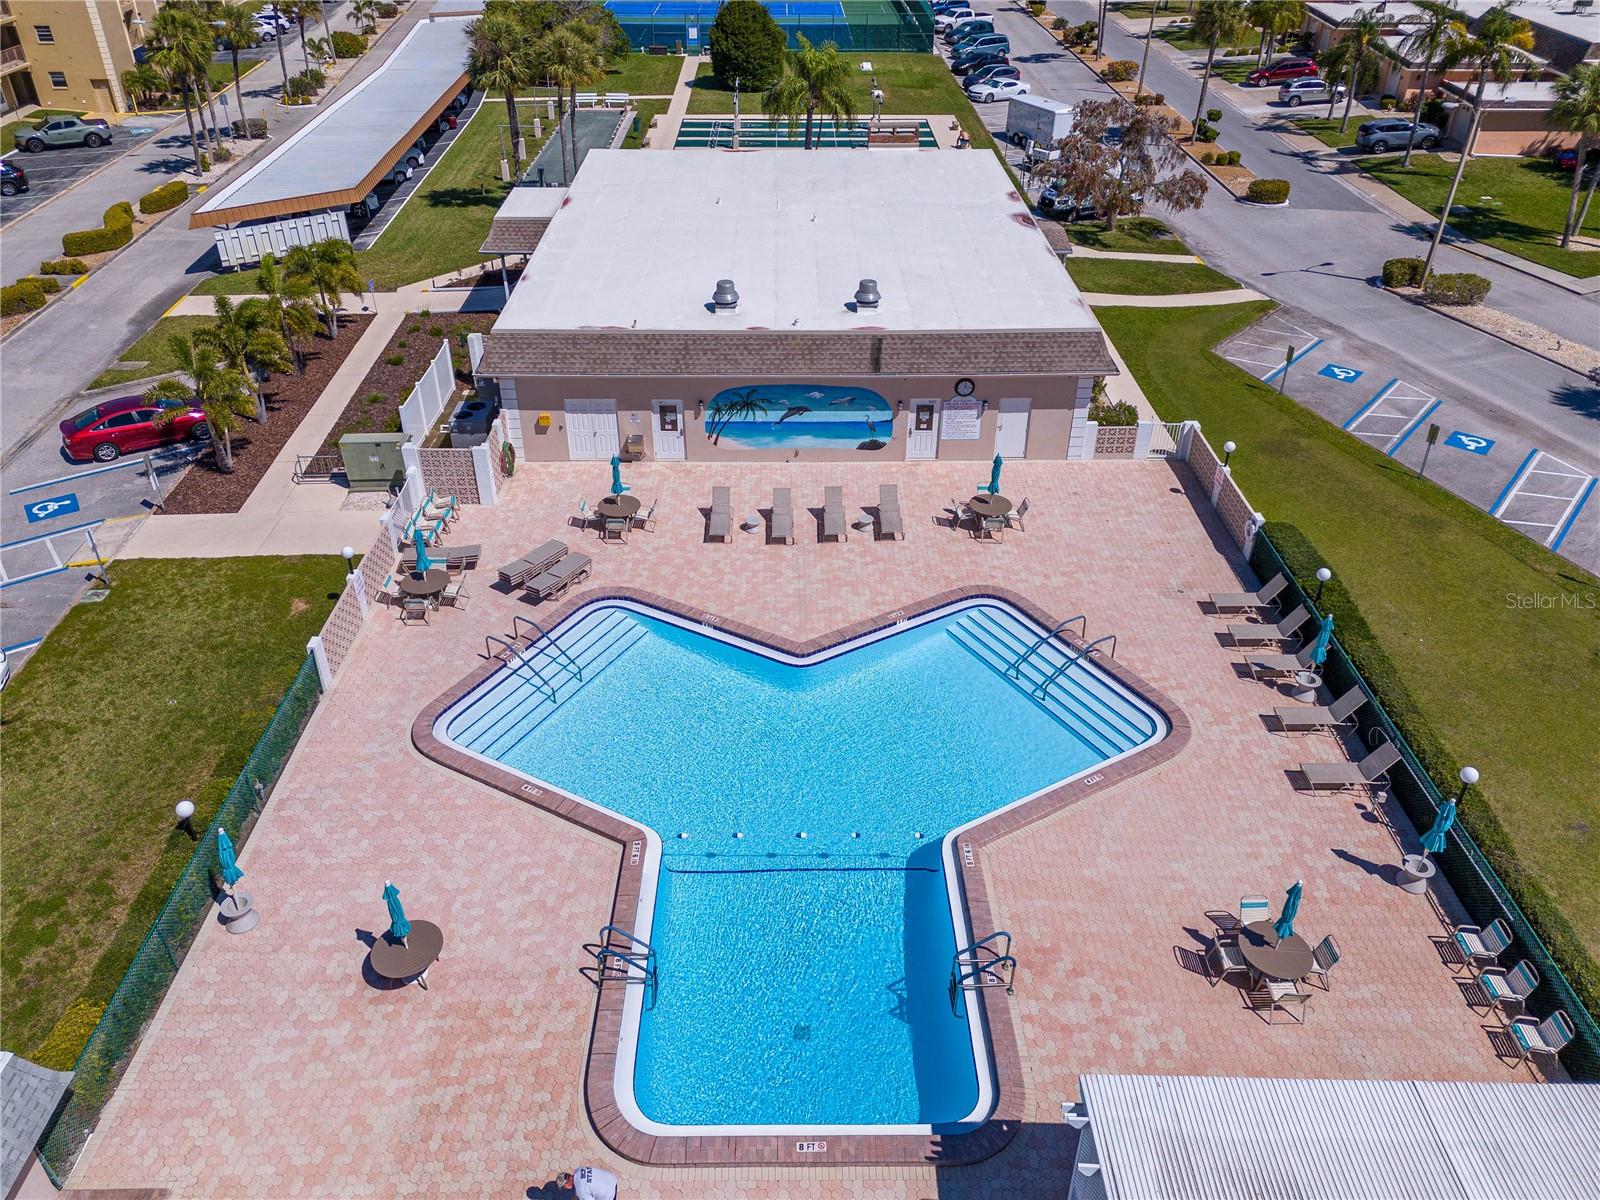 Aerial of the community pool